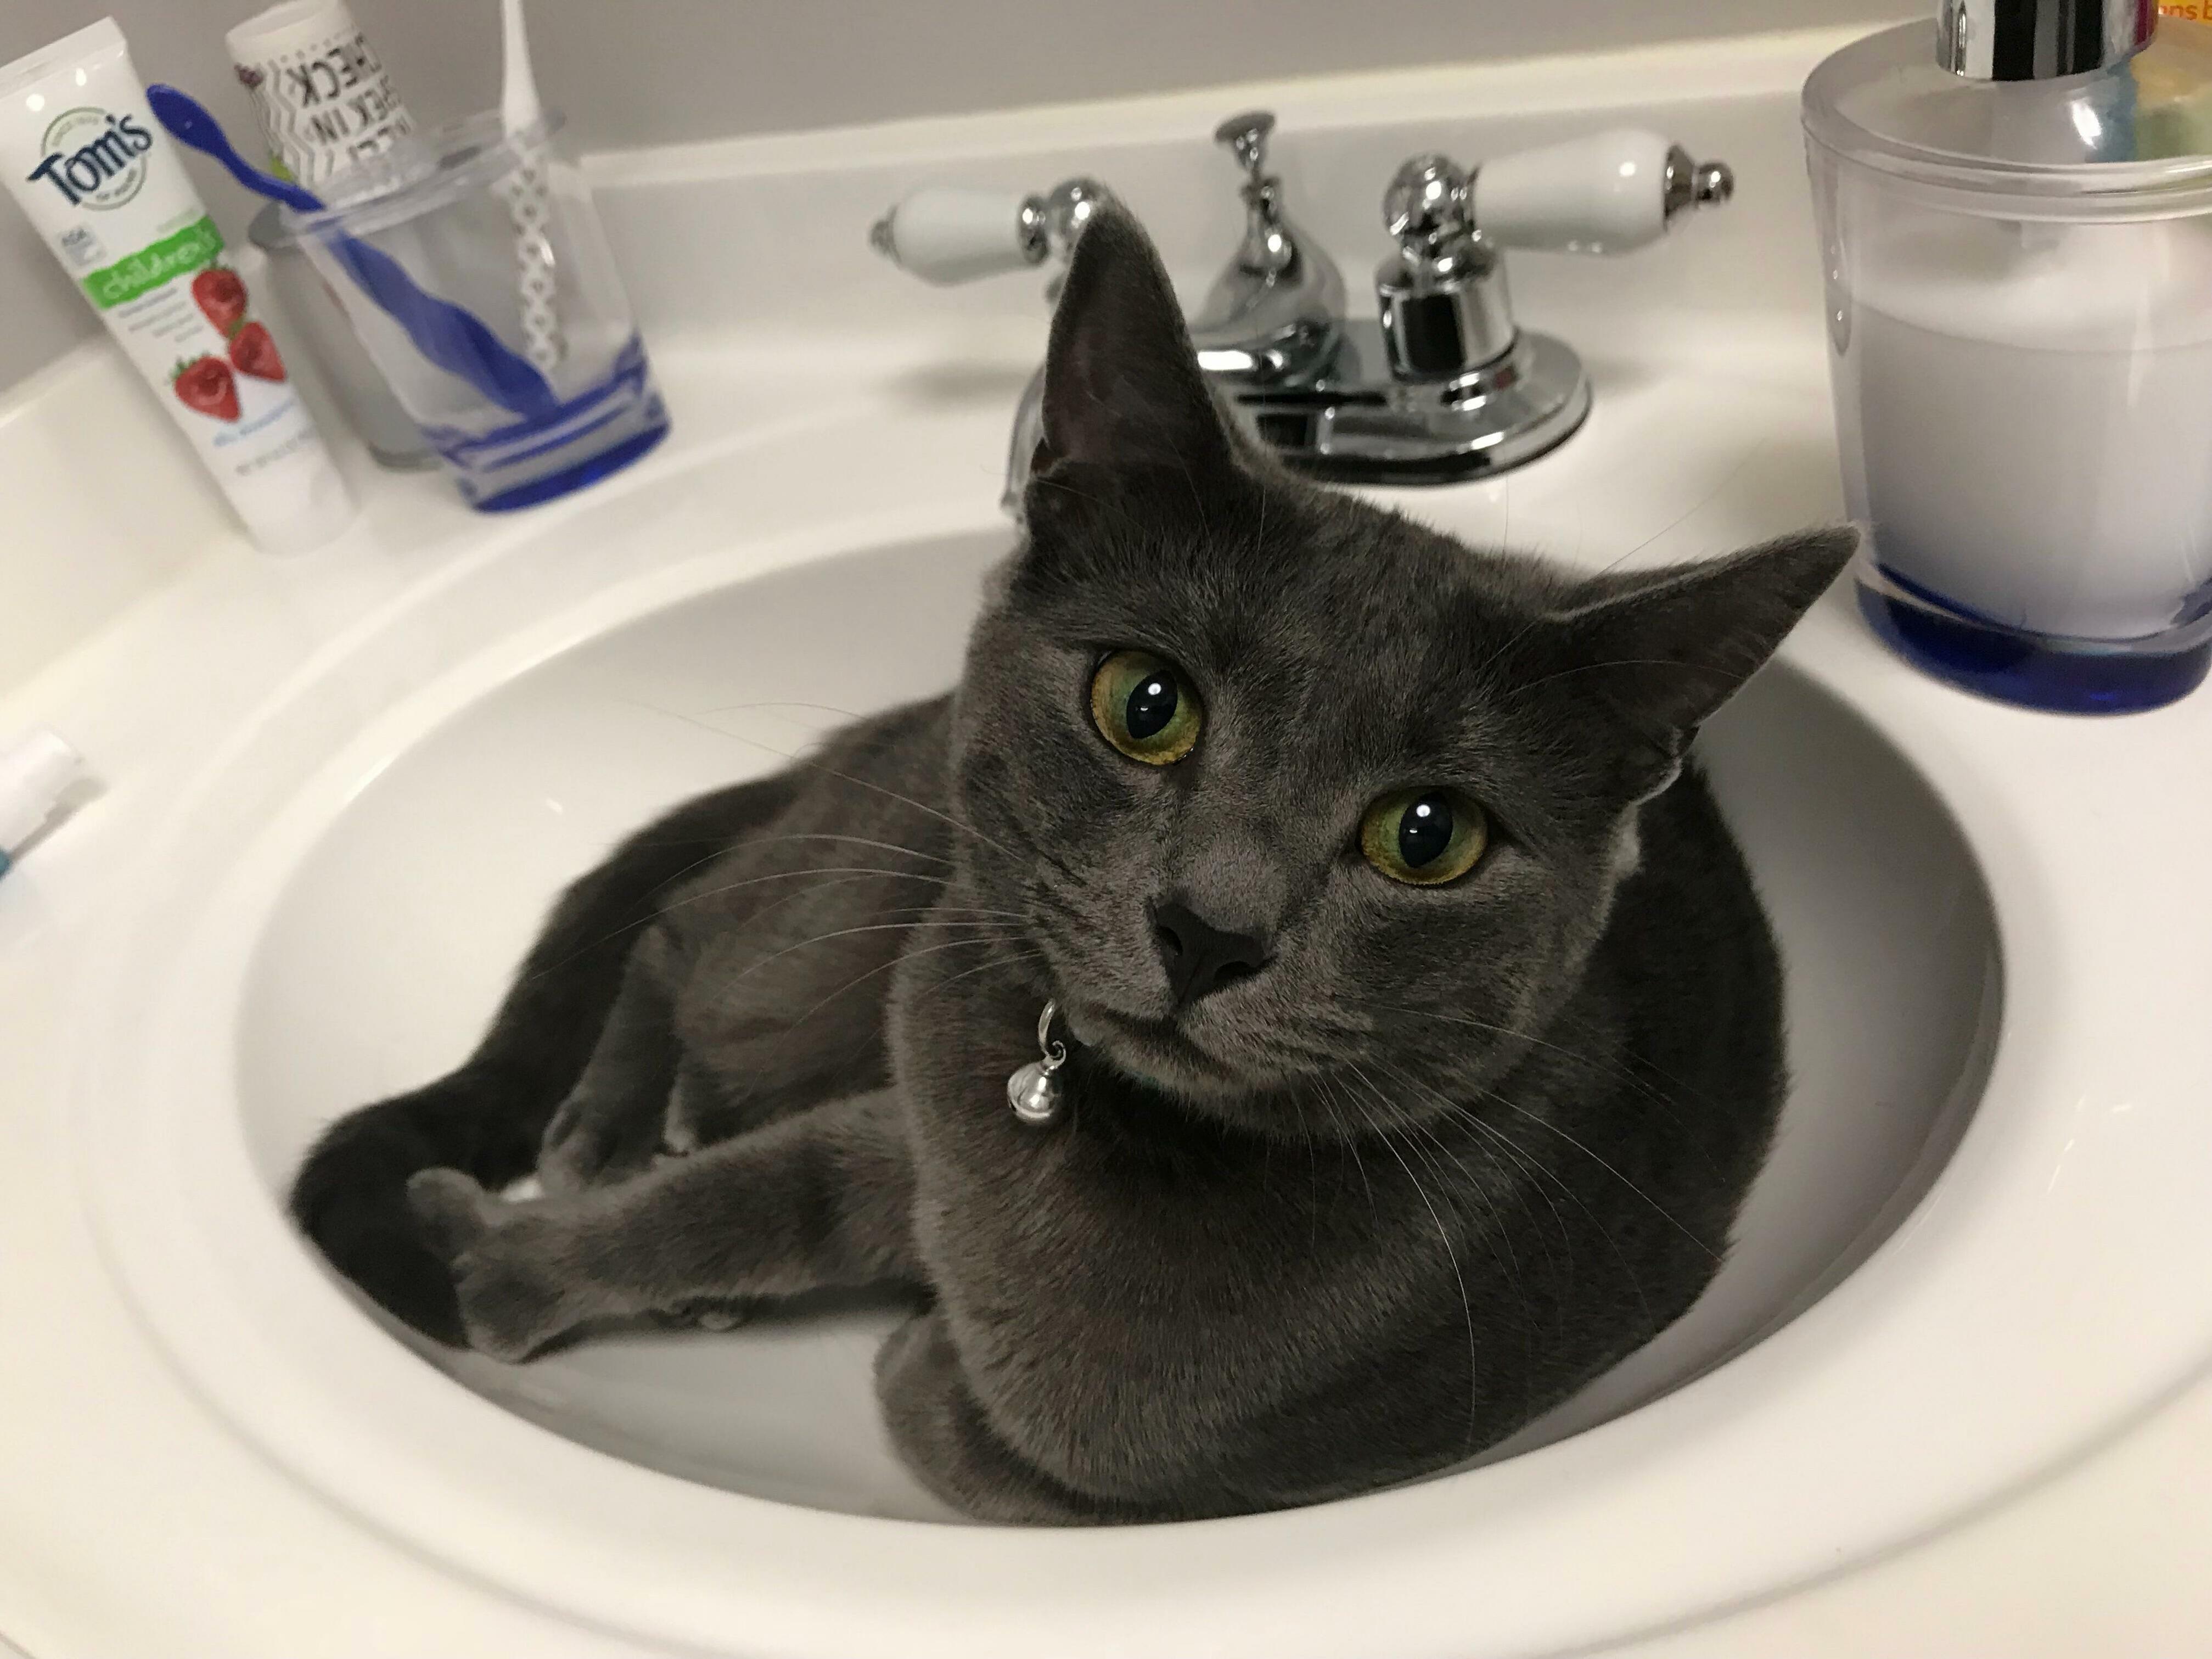 One of his favorite places is the bathroom sink